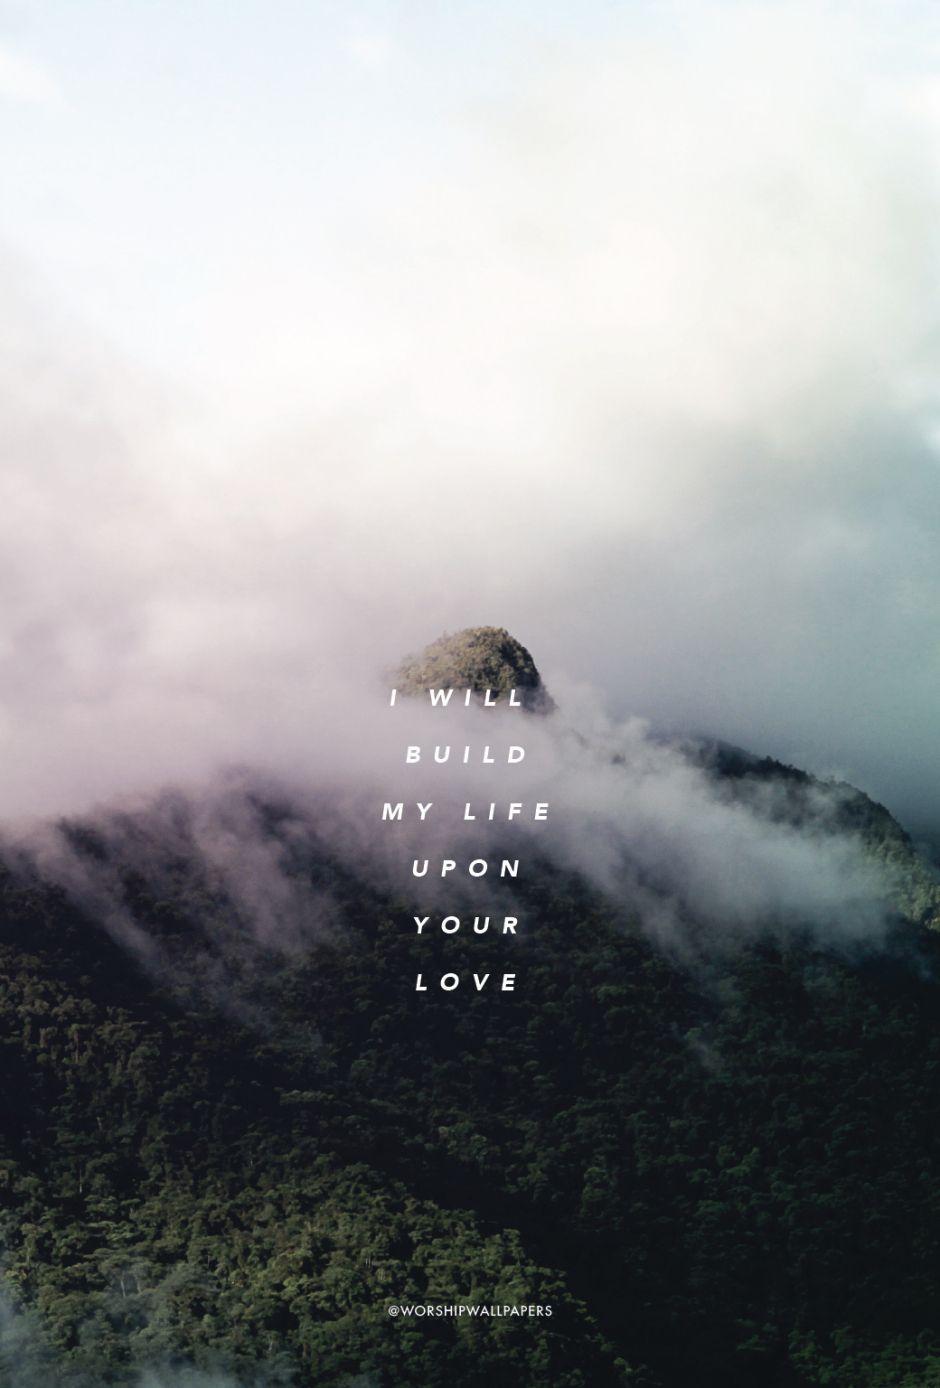 Elevation Worship Wallpapers